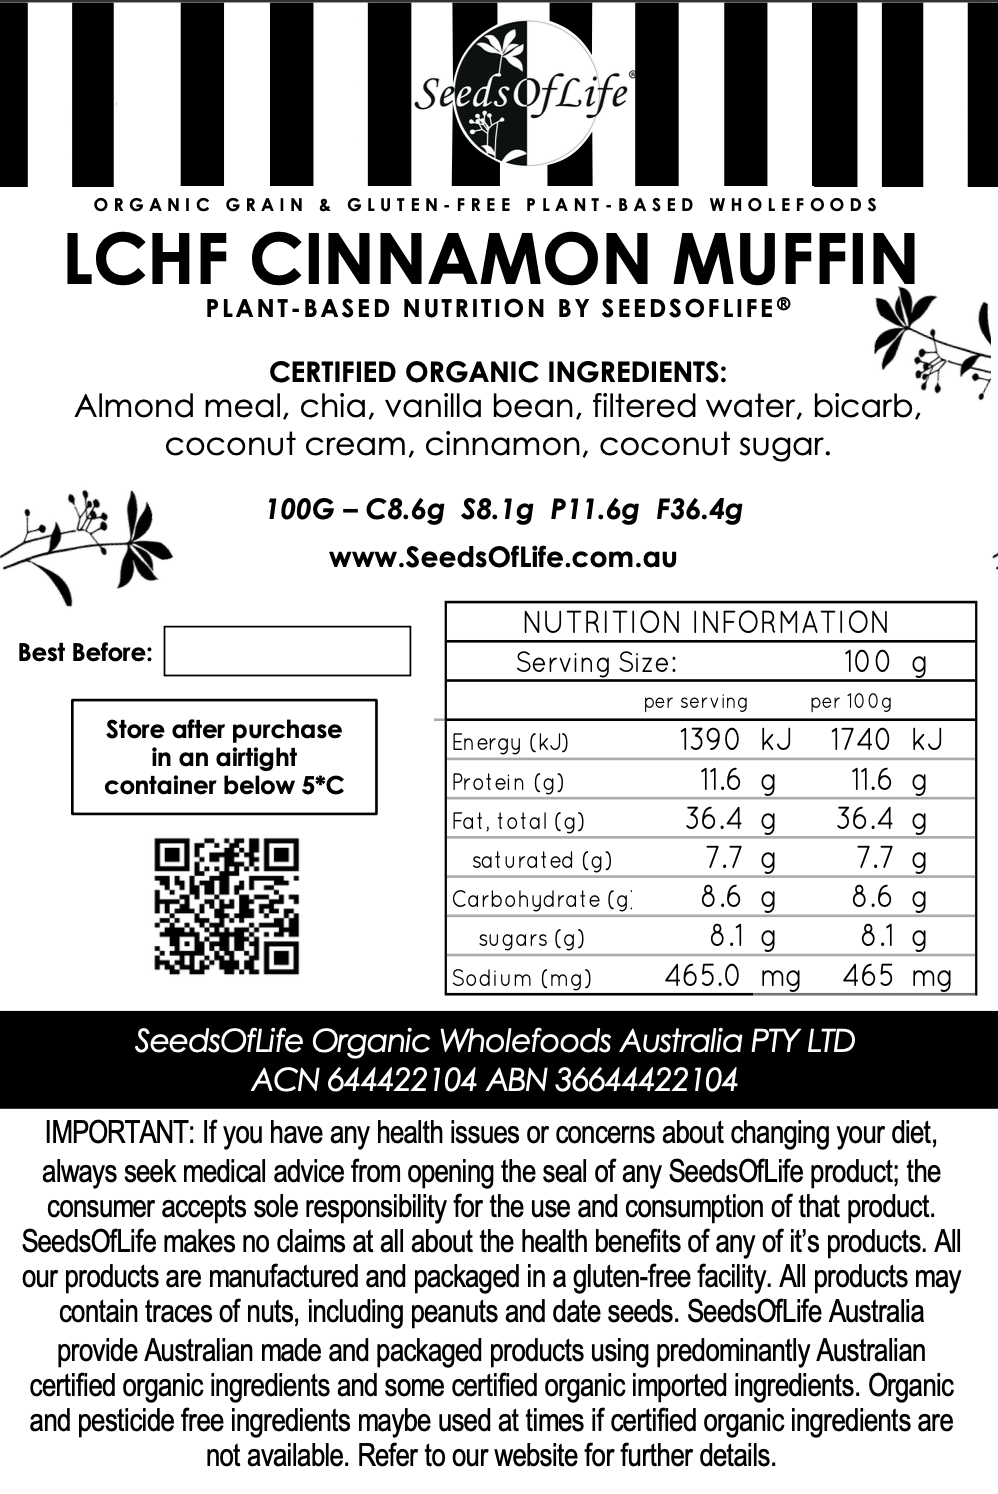 LOW CARB CINNAMON MUFFIN 170g